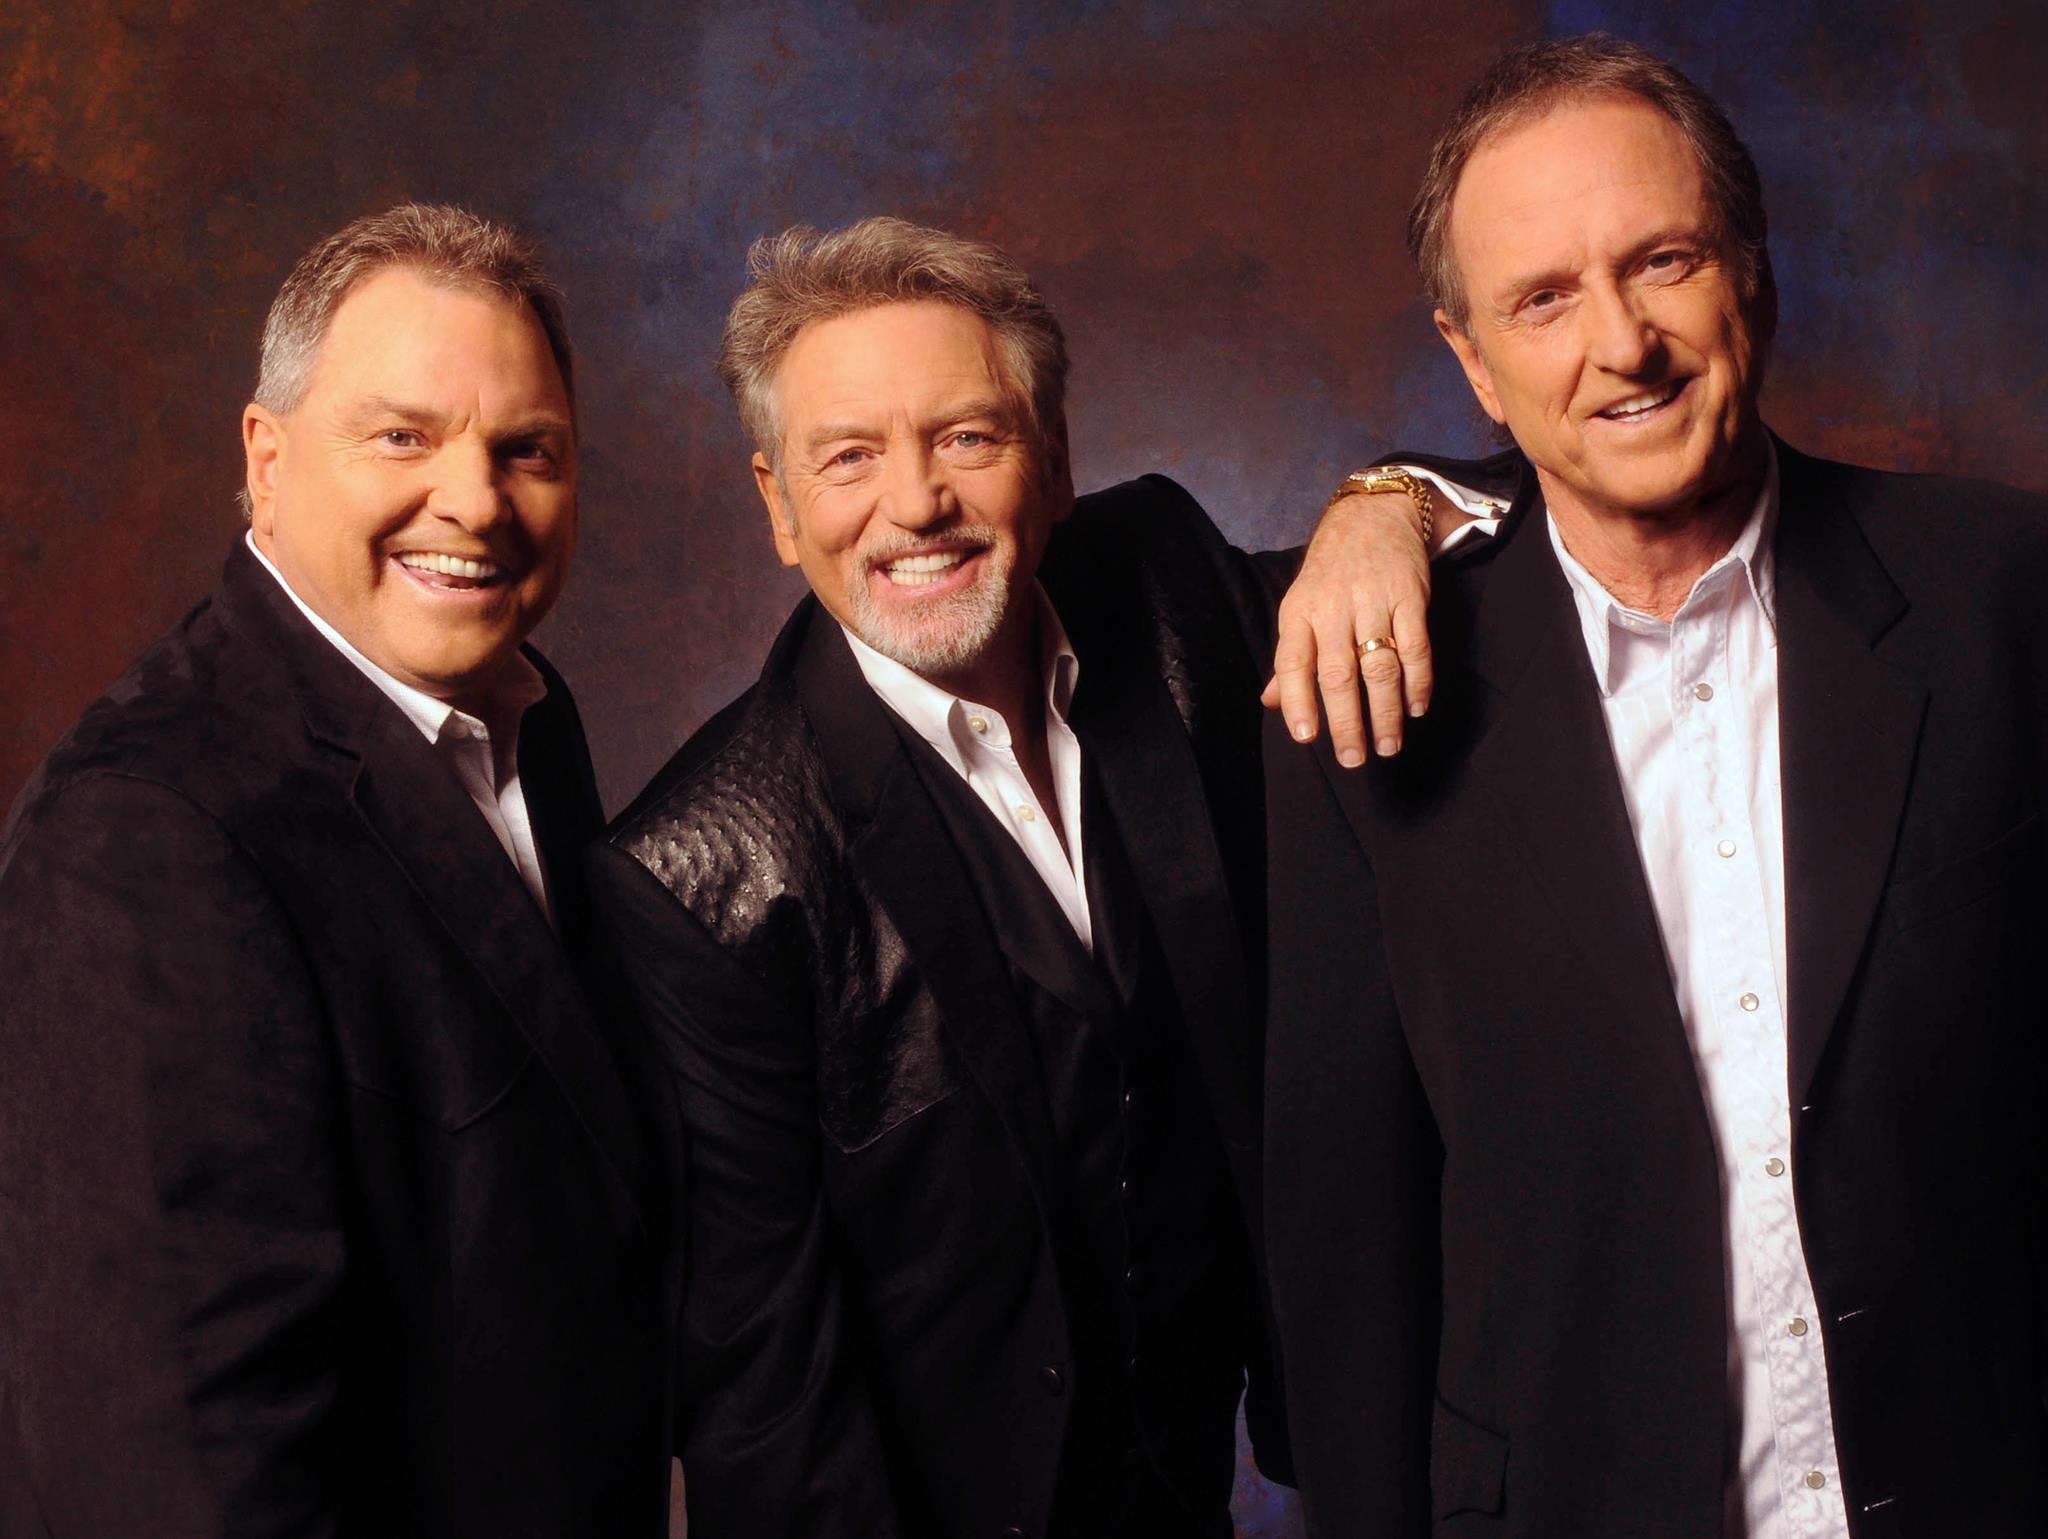 Larry Gatlin and the Gatlin Brothers will be performing at Campbellsville University's Ransdell Chapel Friday, April 17 at 8 p.m. for their 60th Anniversary Tour.